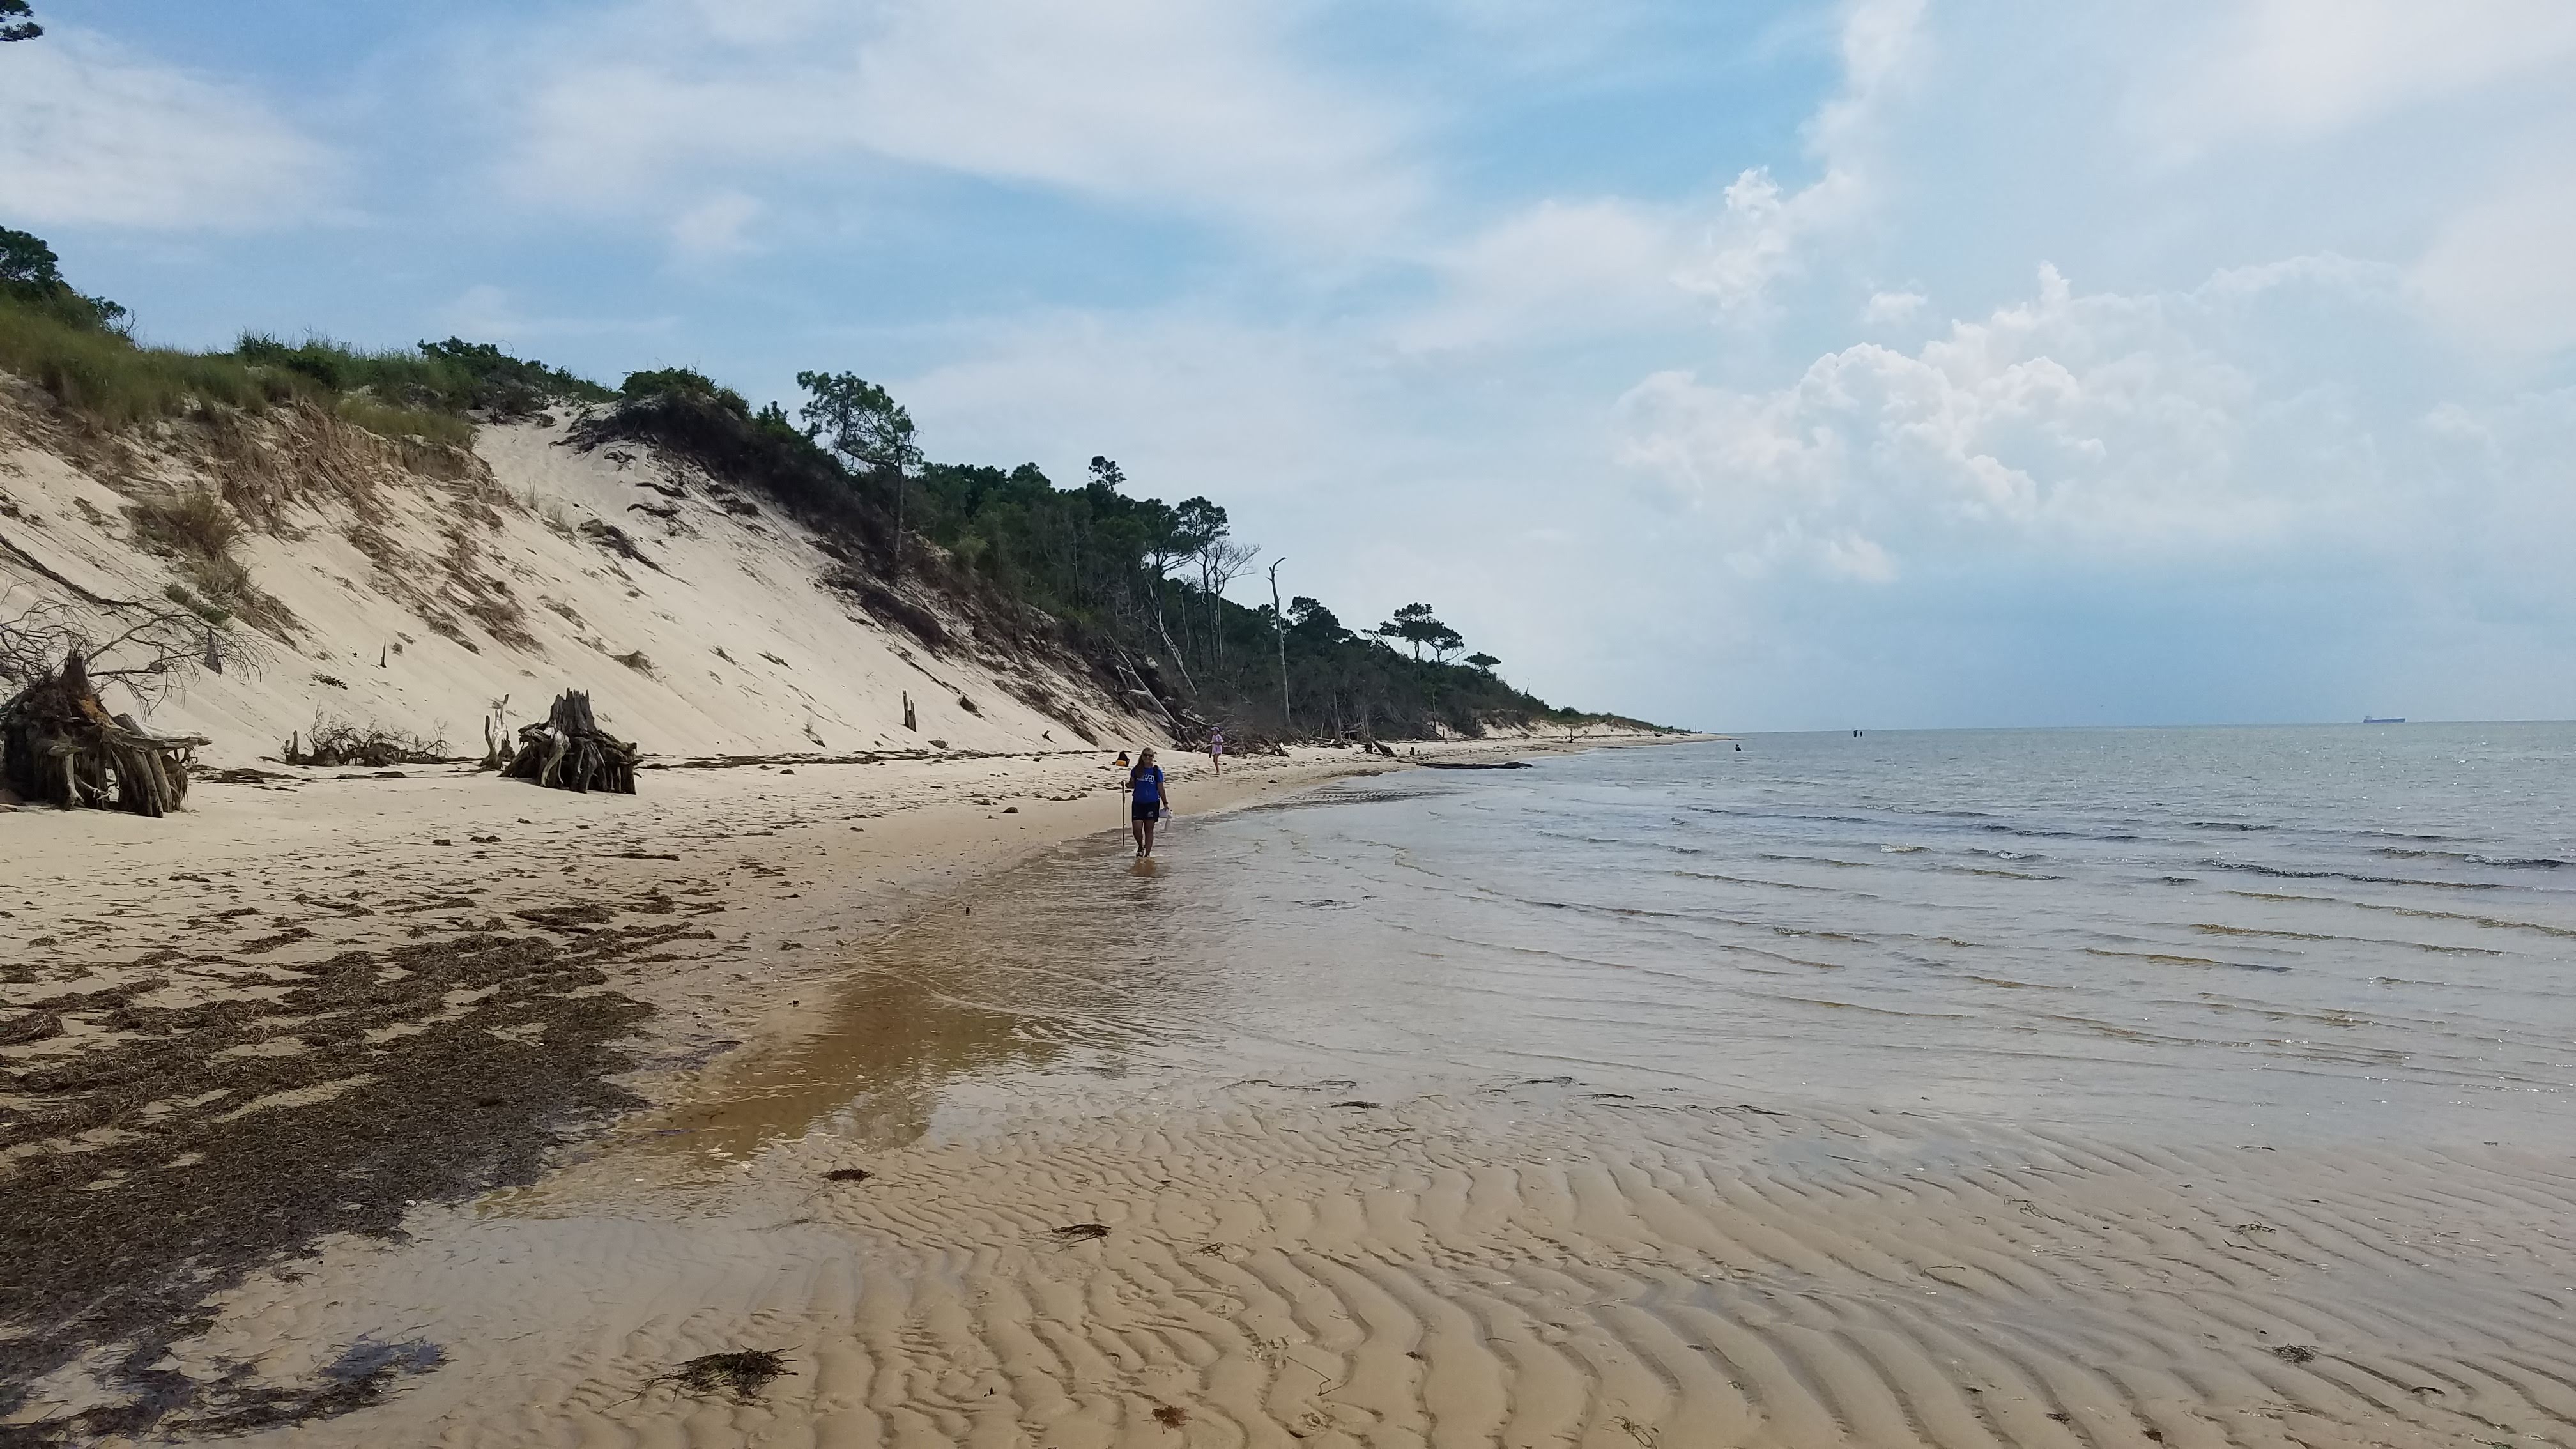 Student in the distance walking along an eroding shoreline with dunes